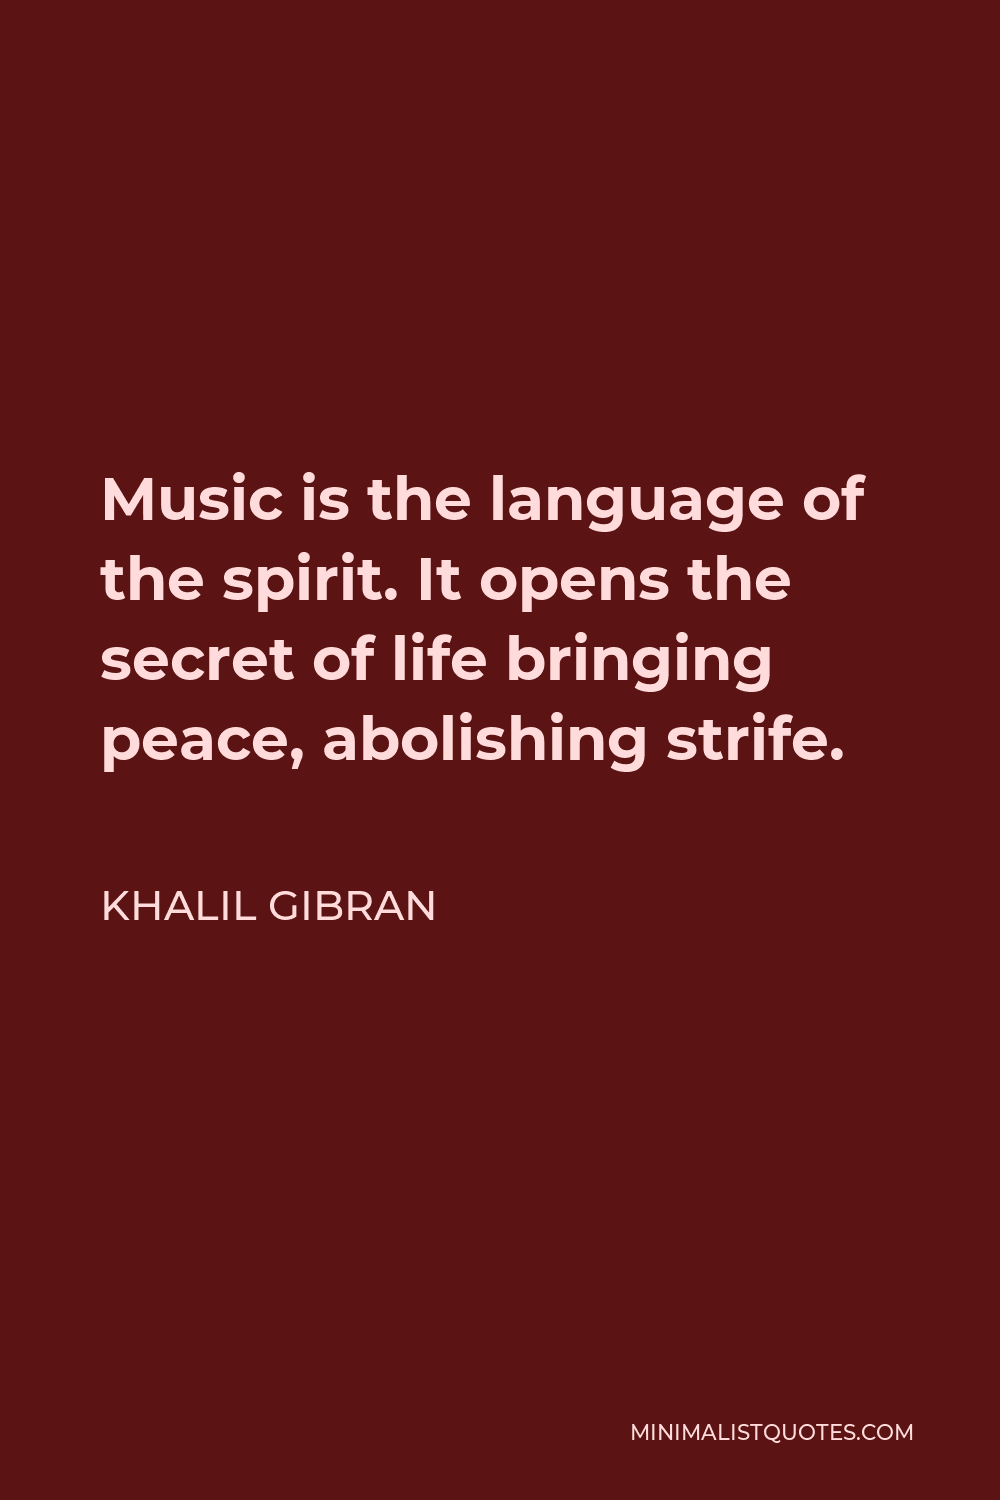 Khalil Gibran Quote - Music is the language of the spirit. It opens the secret of life bringing peace, abolishing strife.